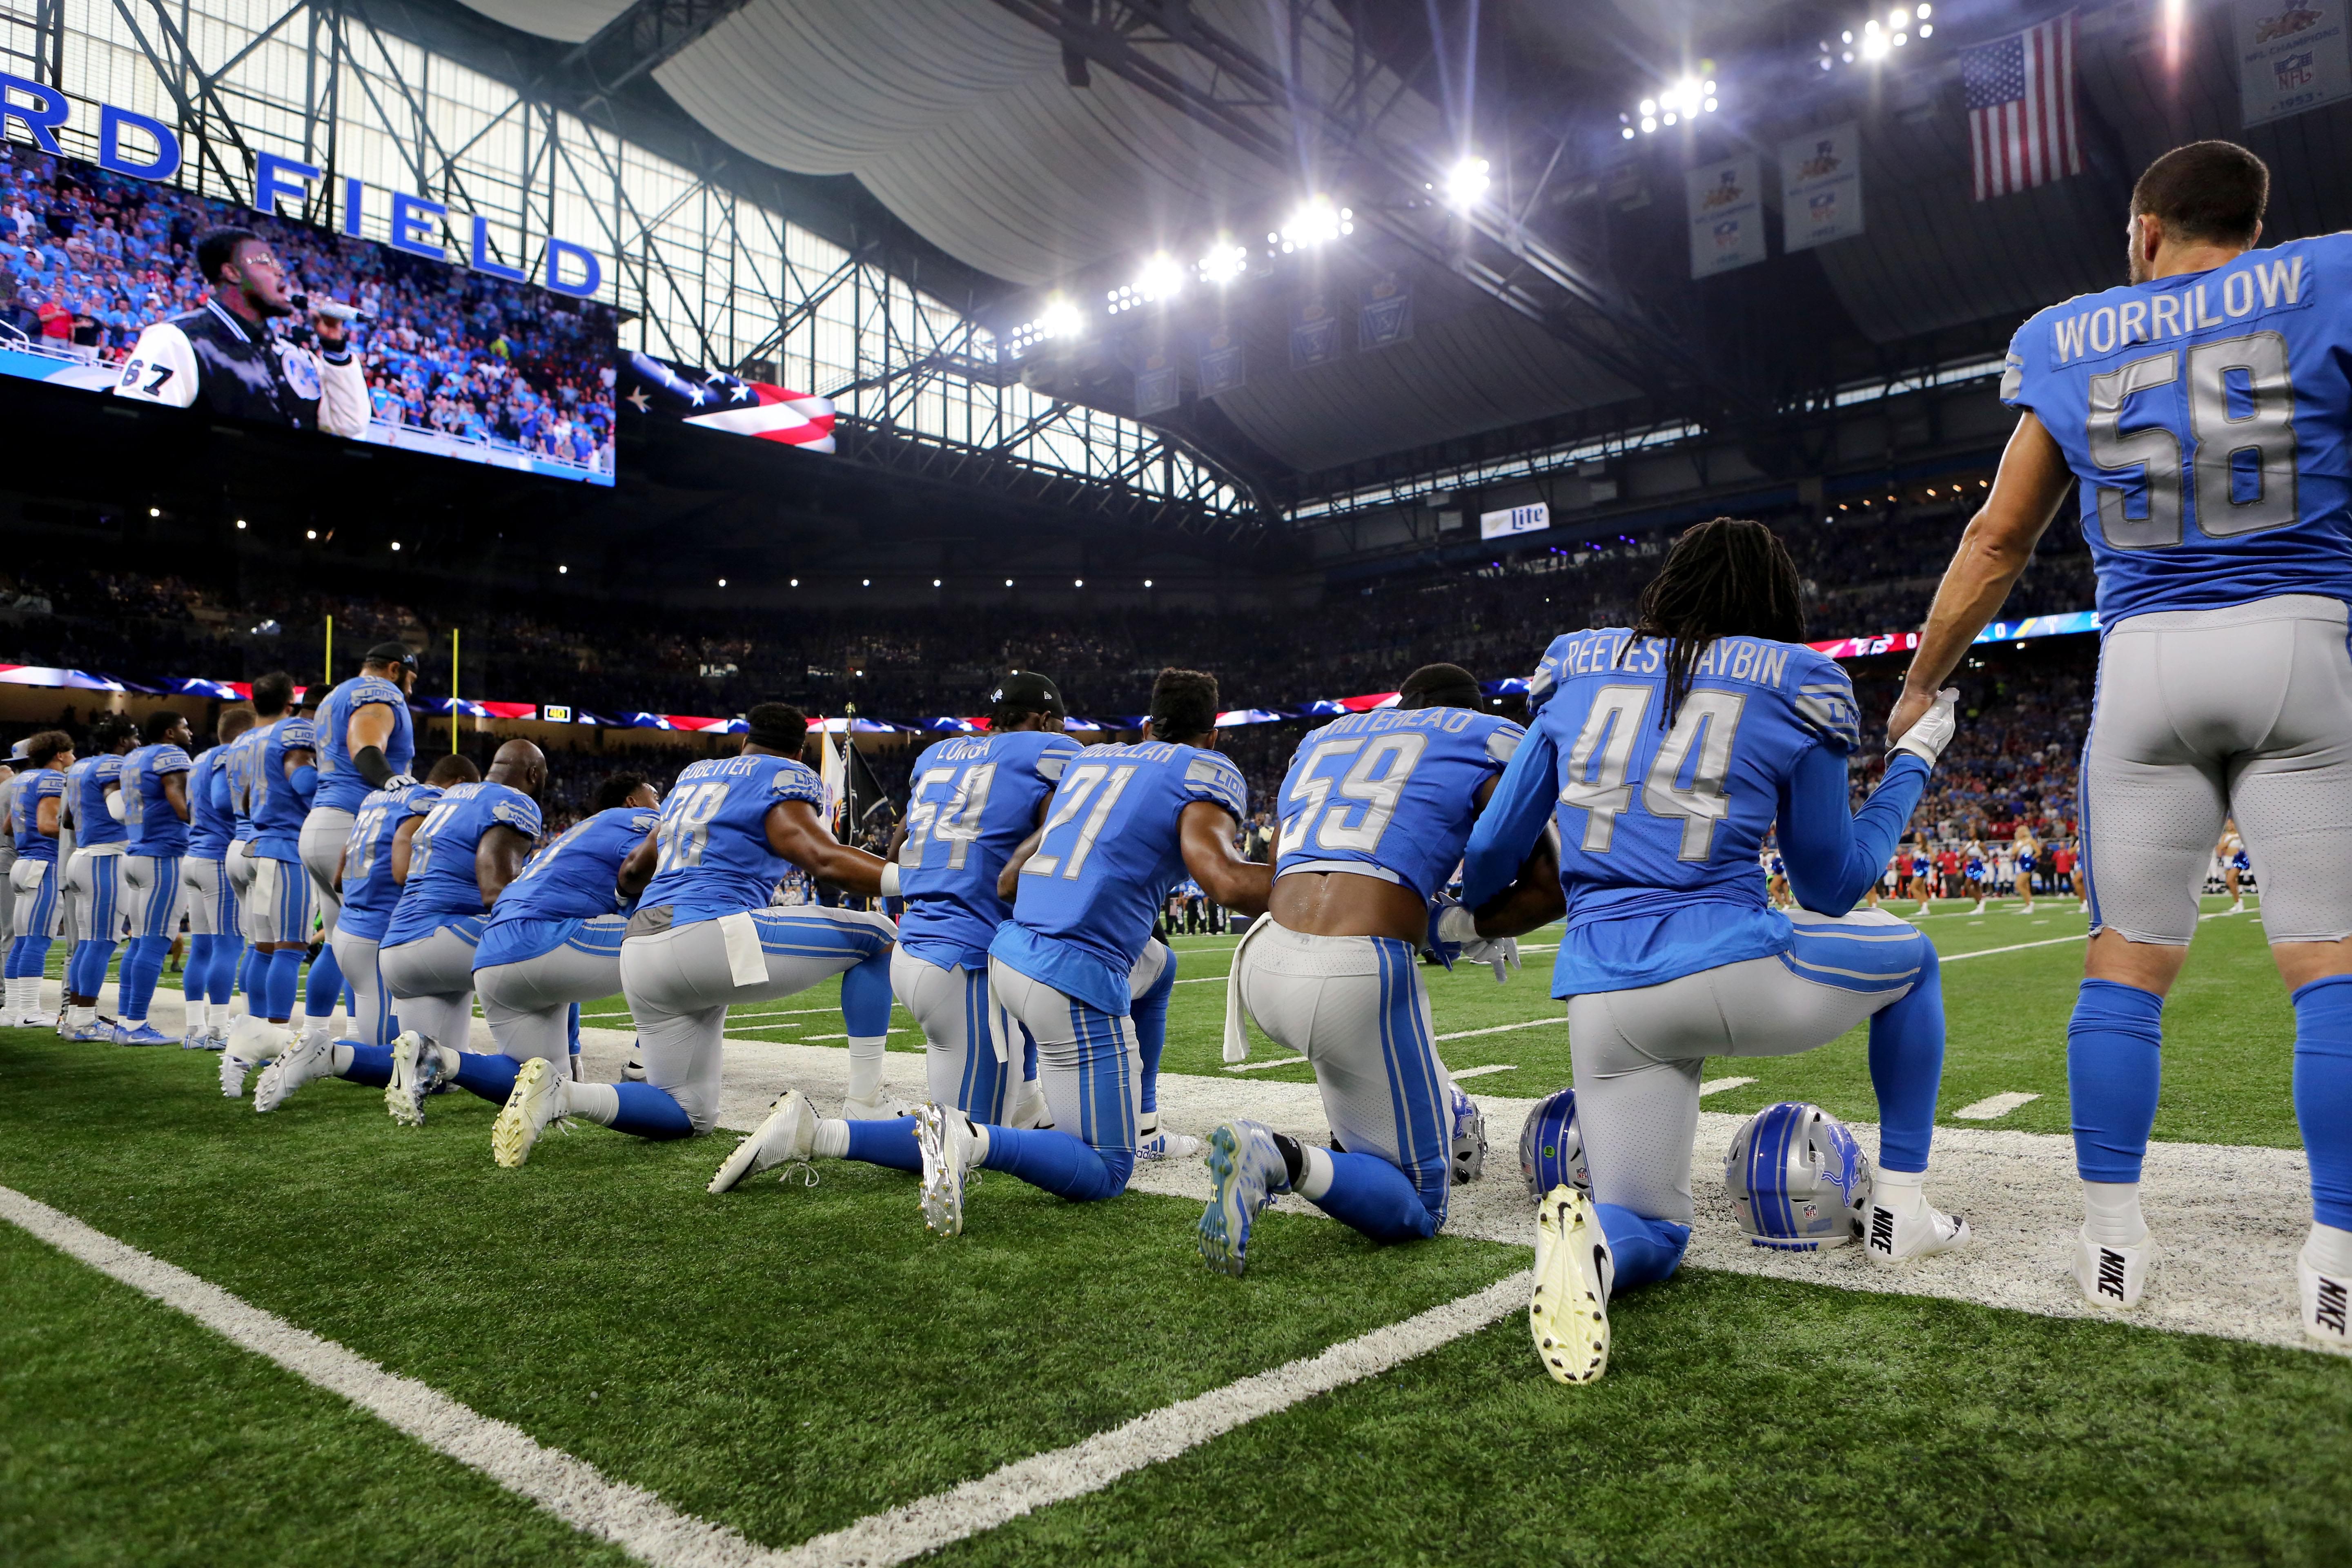 NFL Players Kneel In Protest During Sunday Night Football [WATCH]